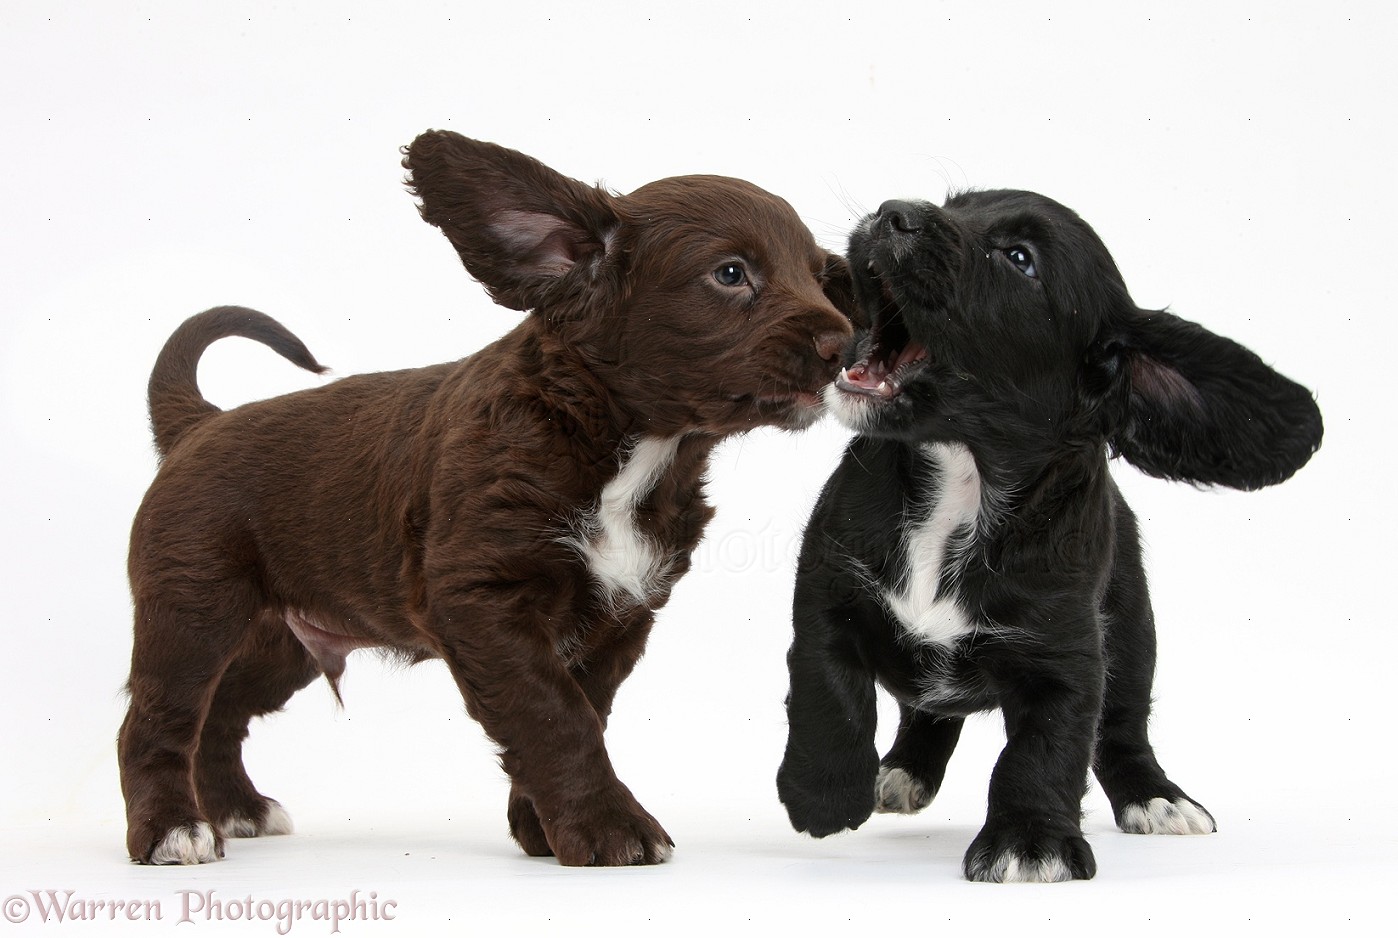 Dogs: Black and chocolate Cocker Spaniel puppies play-fighting photo WP39374